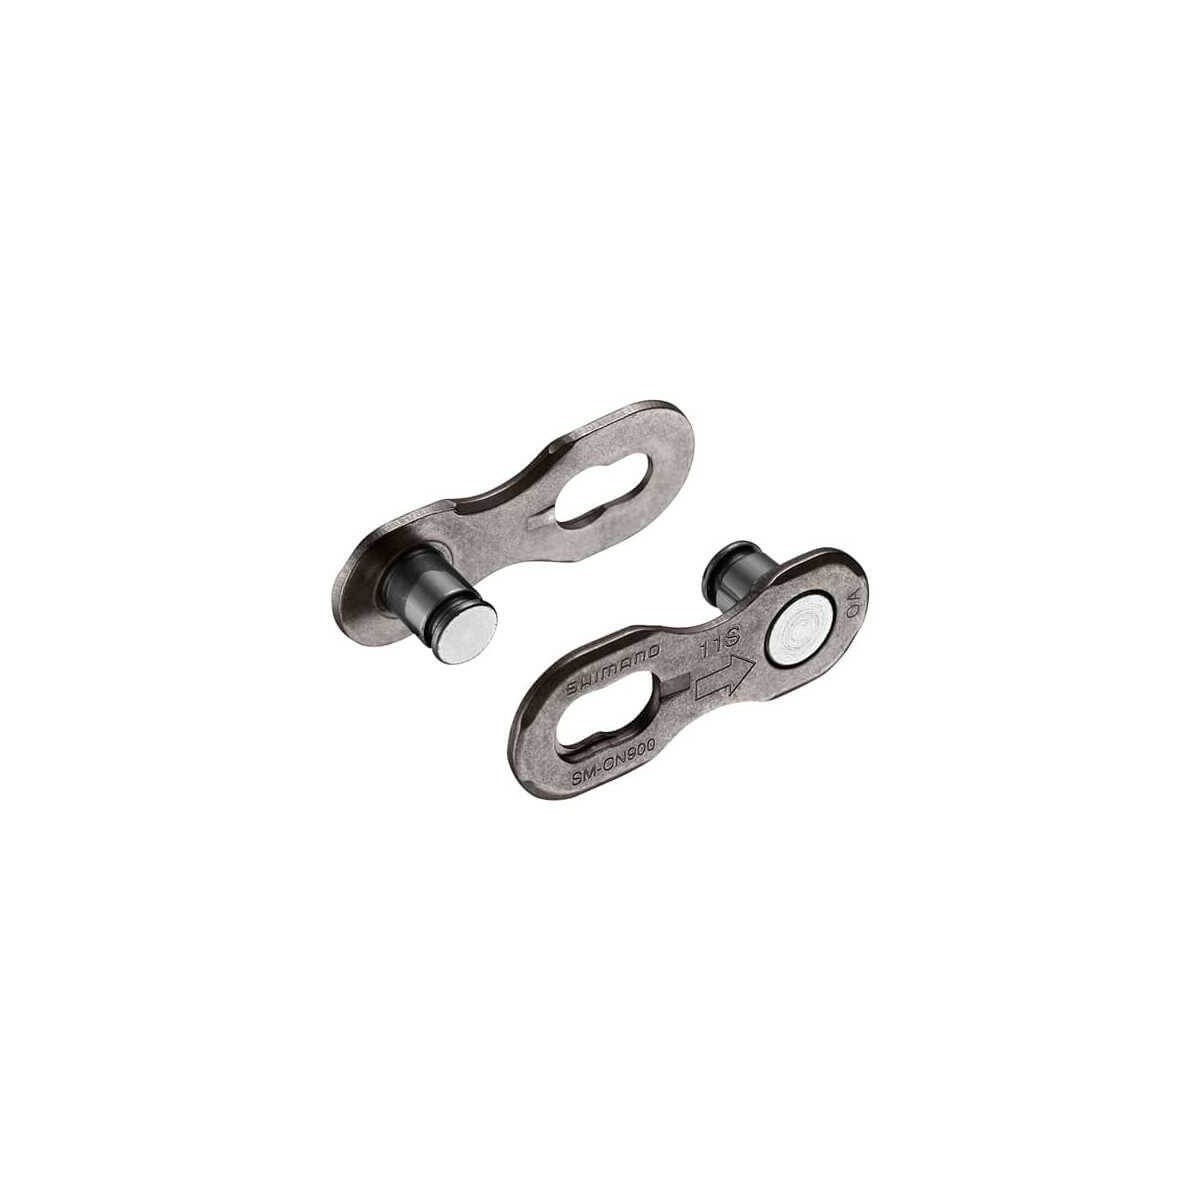 Shimano quick release link for 11s chain (2 pcs.)